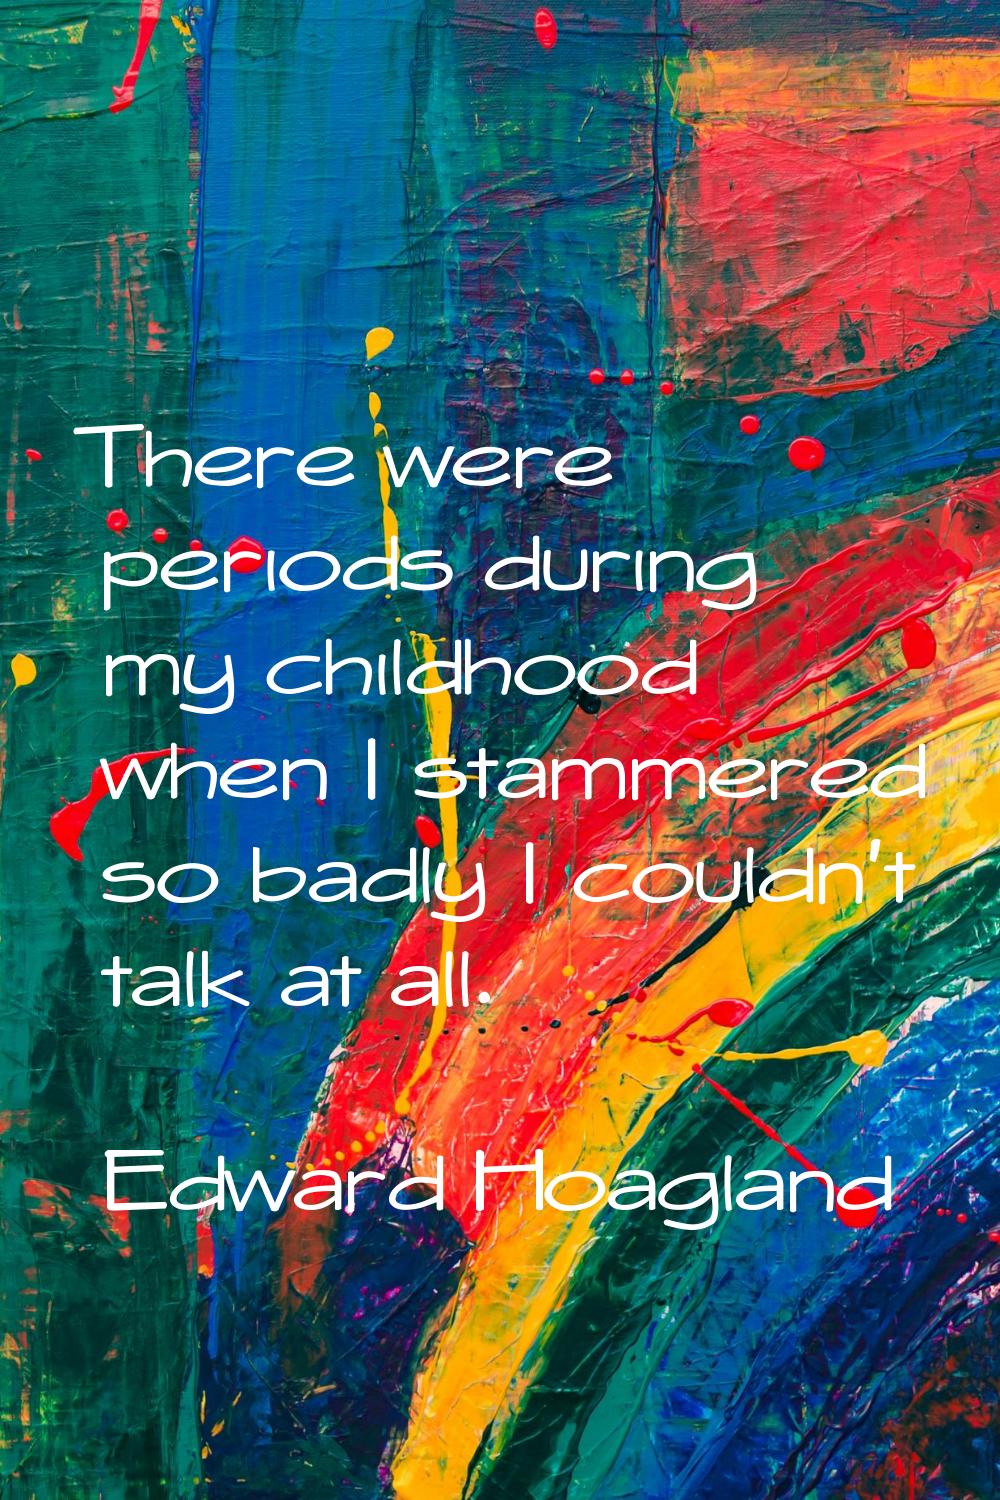 There were periods during my childhood when I stammered so badly I couldn't talk at all.